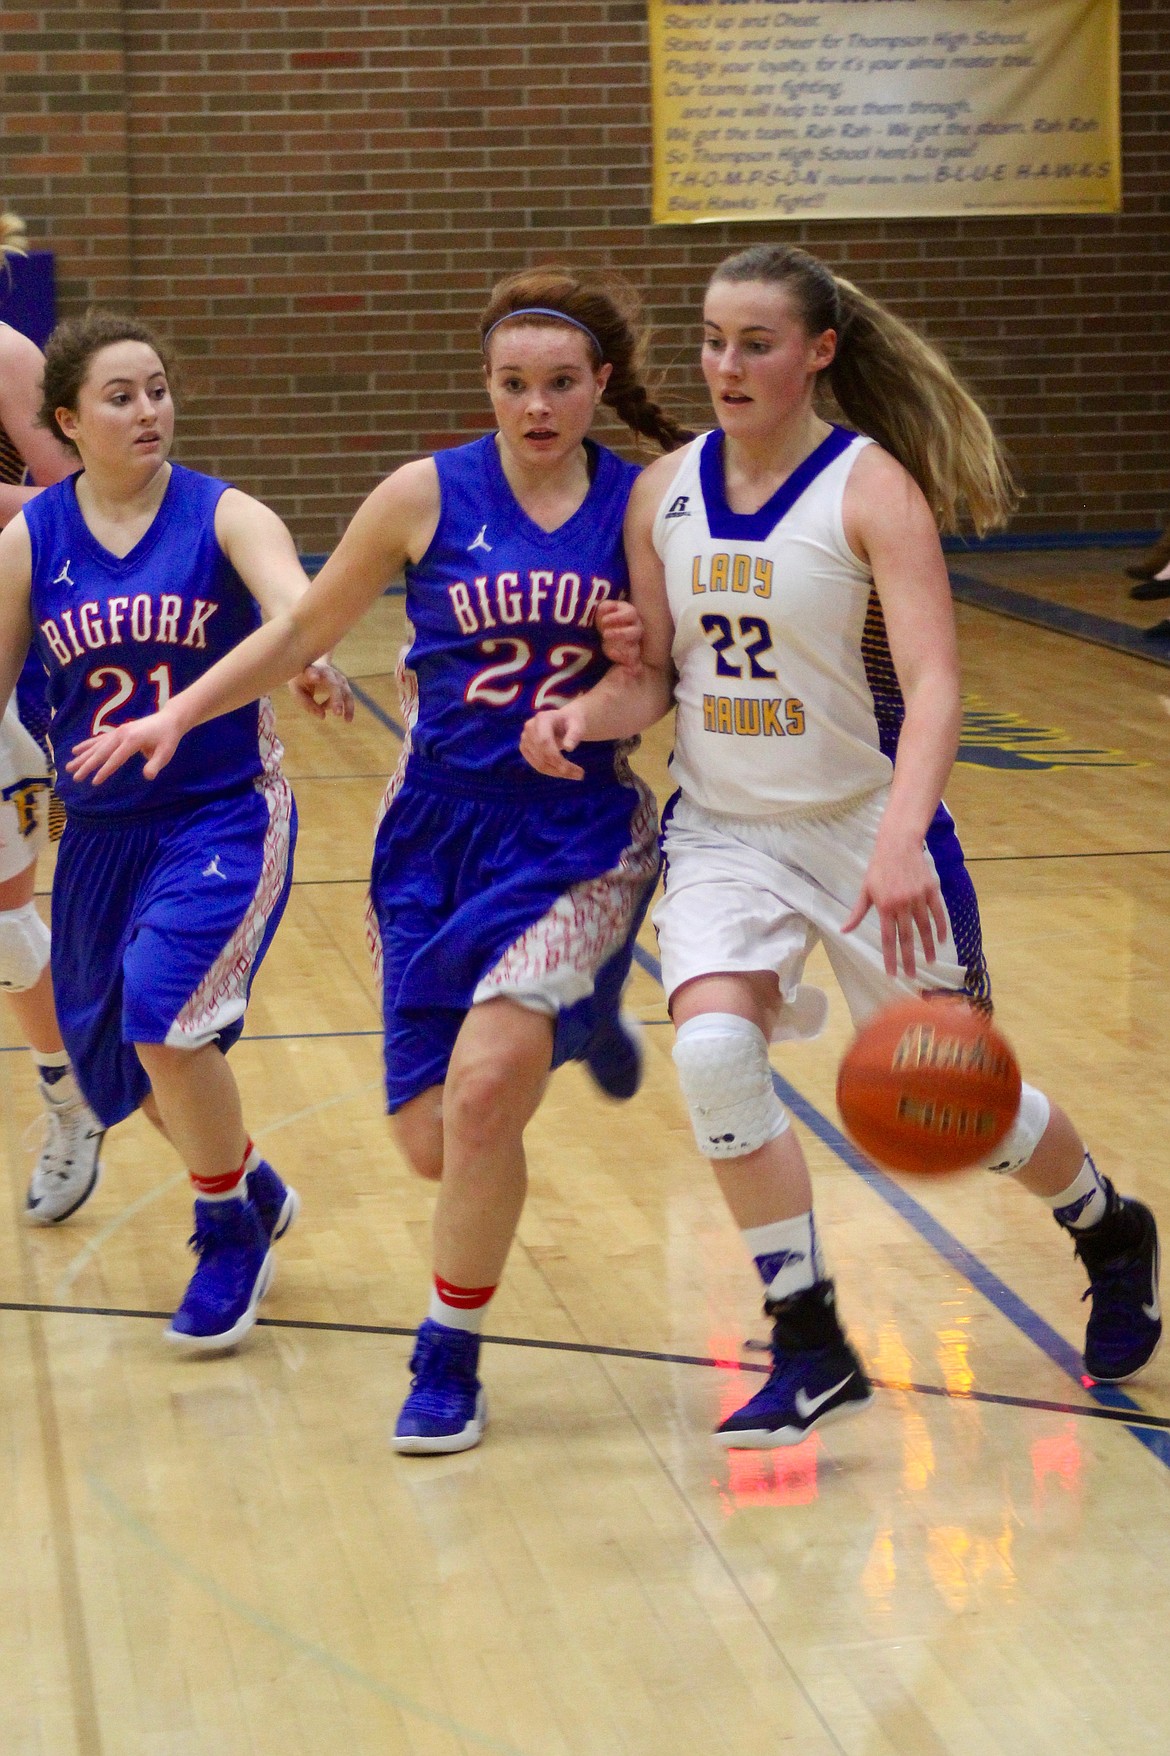 Thompson Falls Lady Hawks (#22) Haley Morgan finds herself being very closely guarded by two Bigfork players.